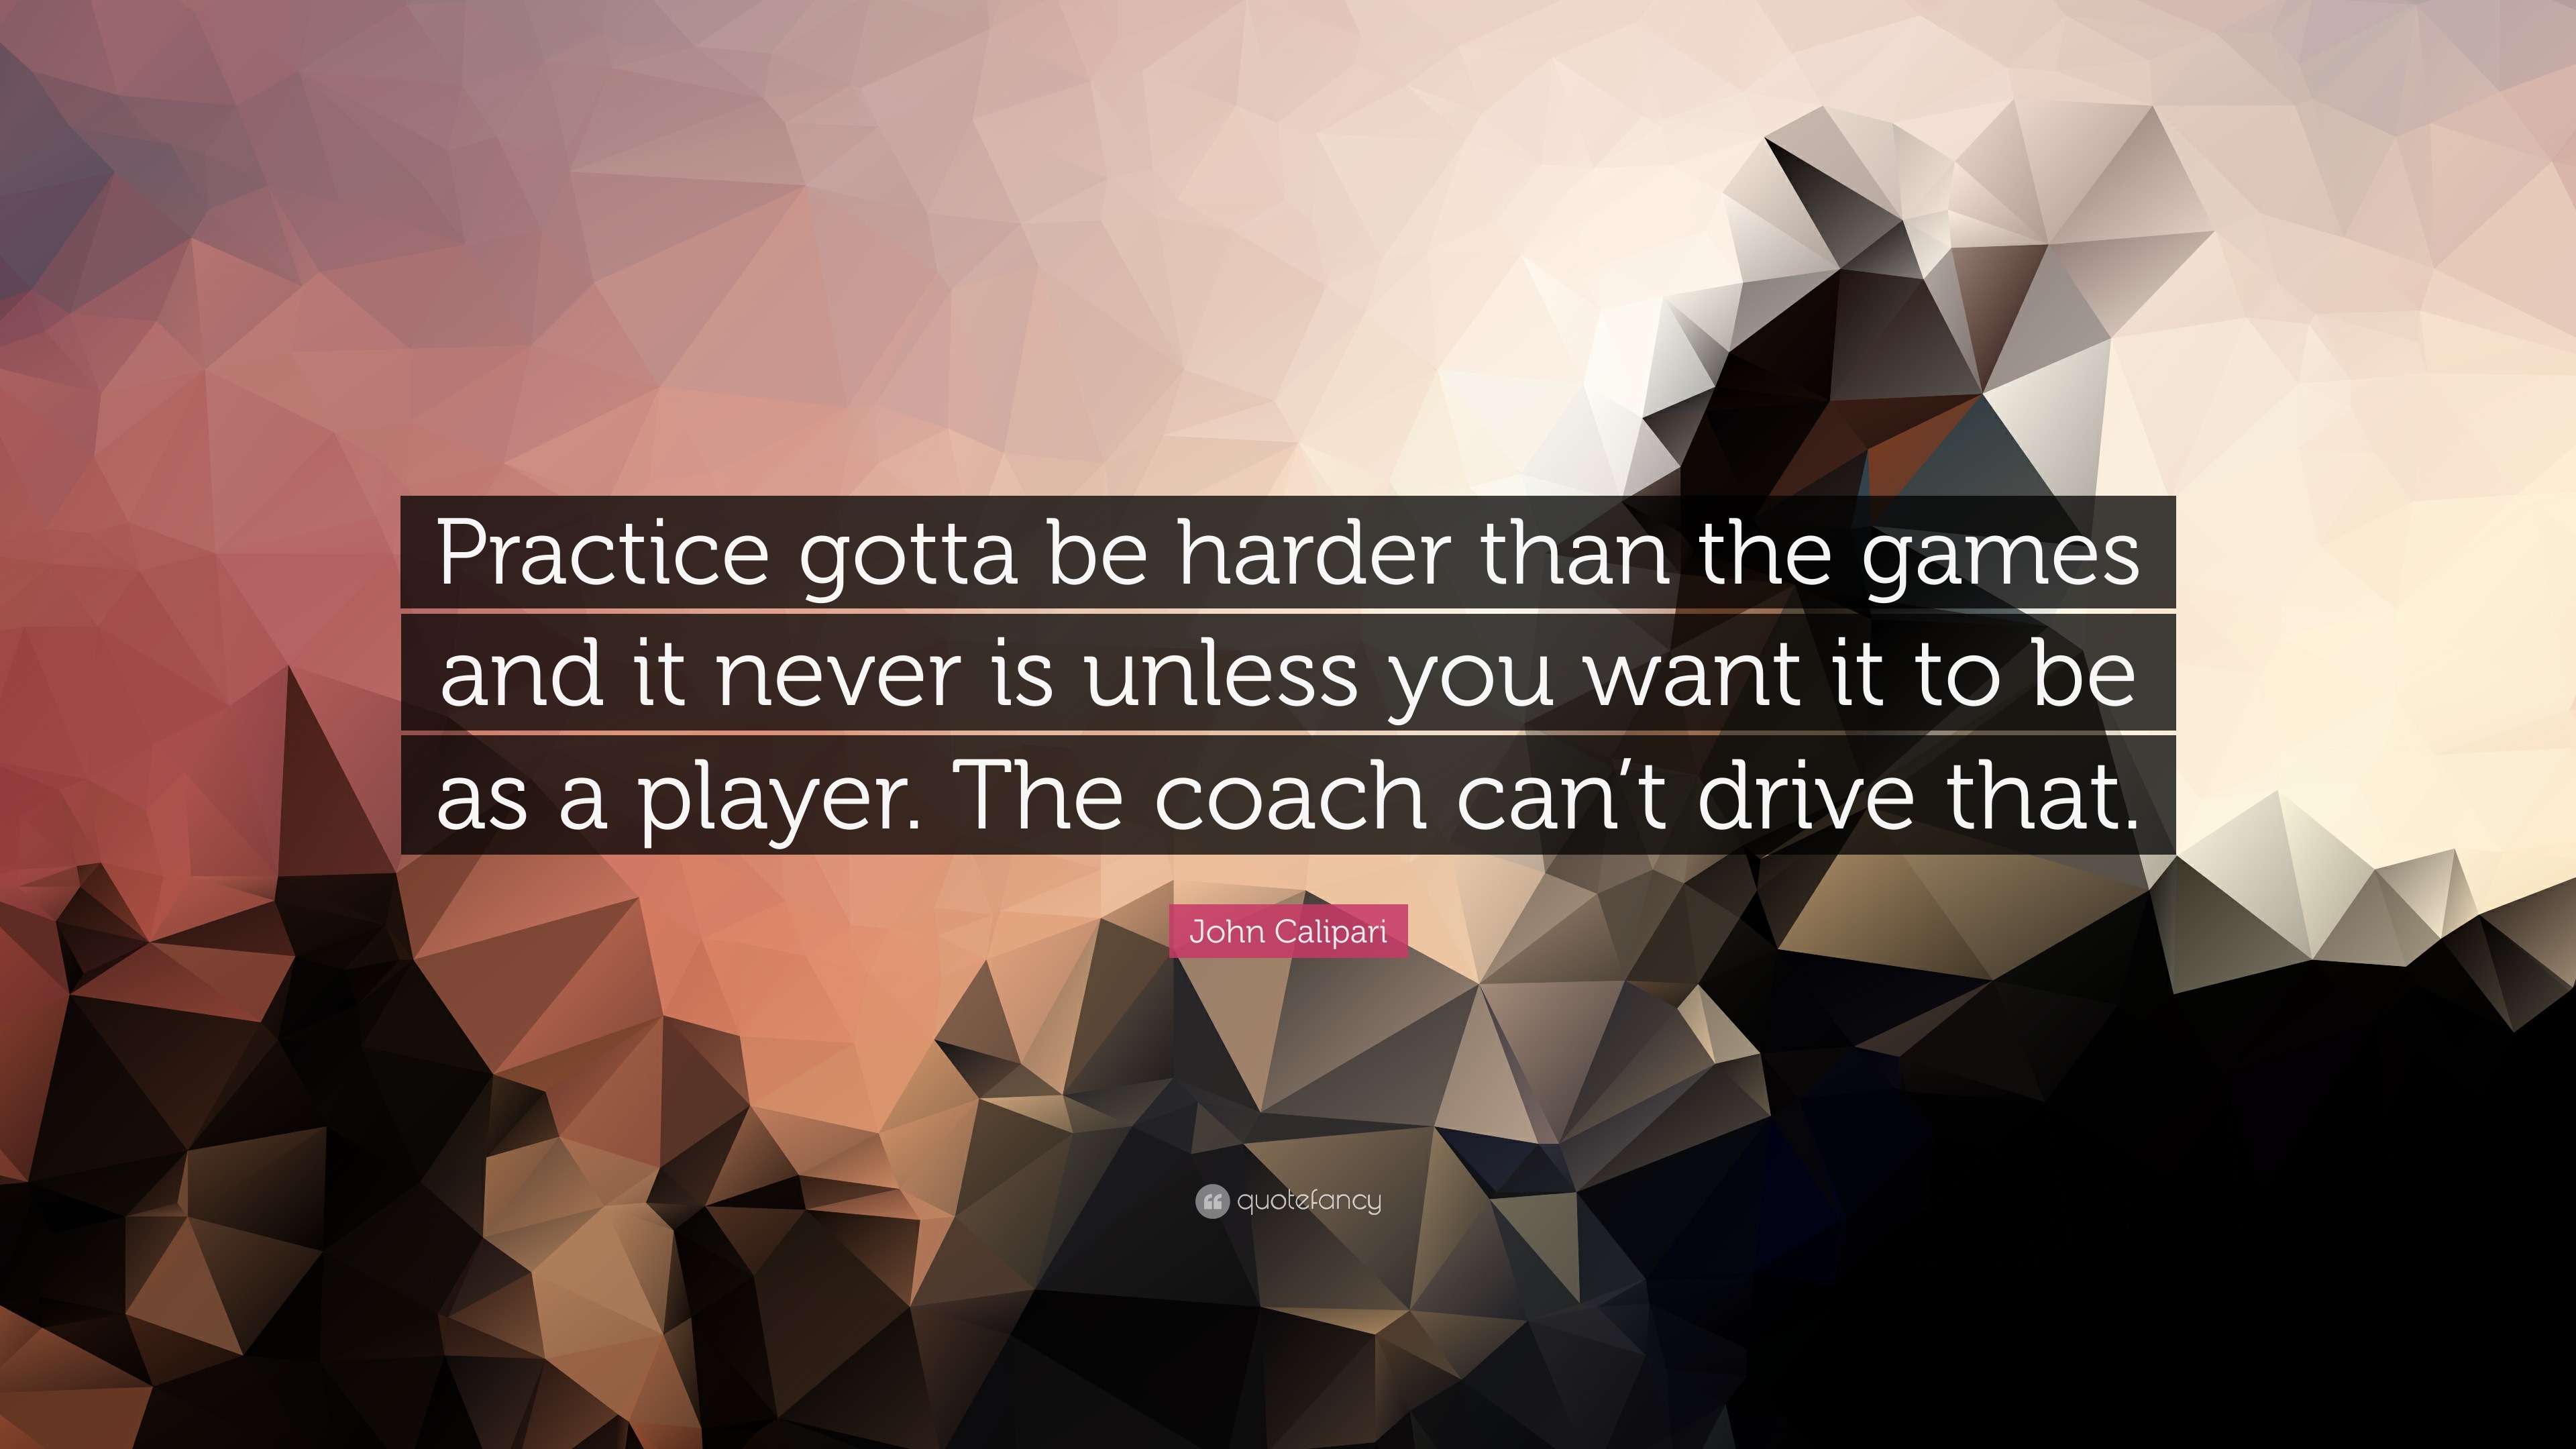 Why You Perform Better In Practice Than Games